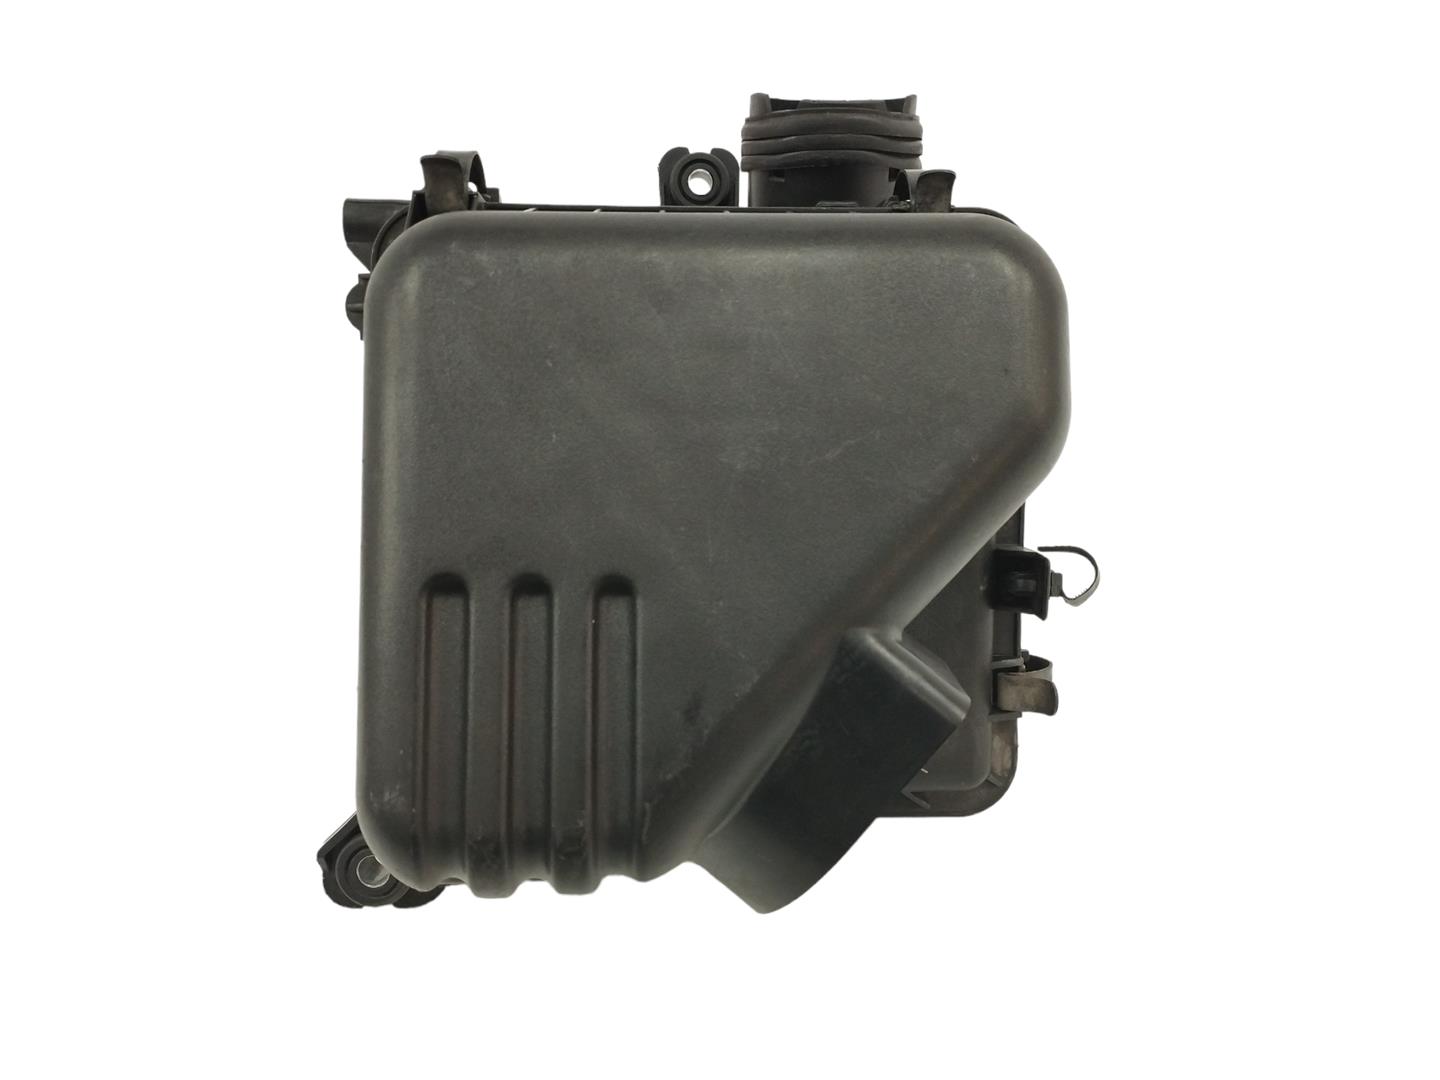 KIA Cee'd 1 generation (2007-2012) Other Engine Compartment Parts 281002H200 22784137